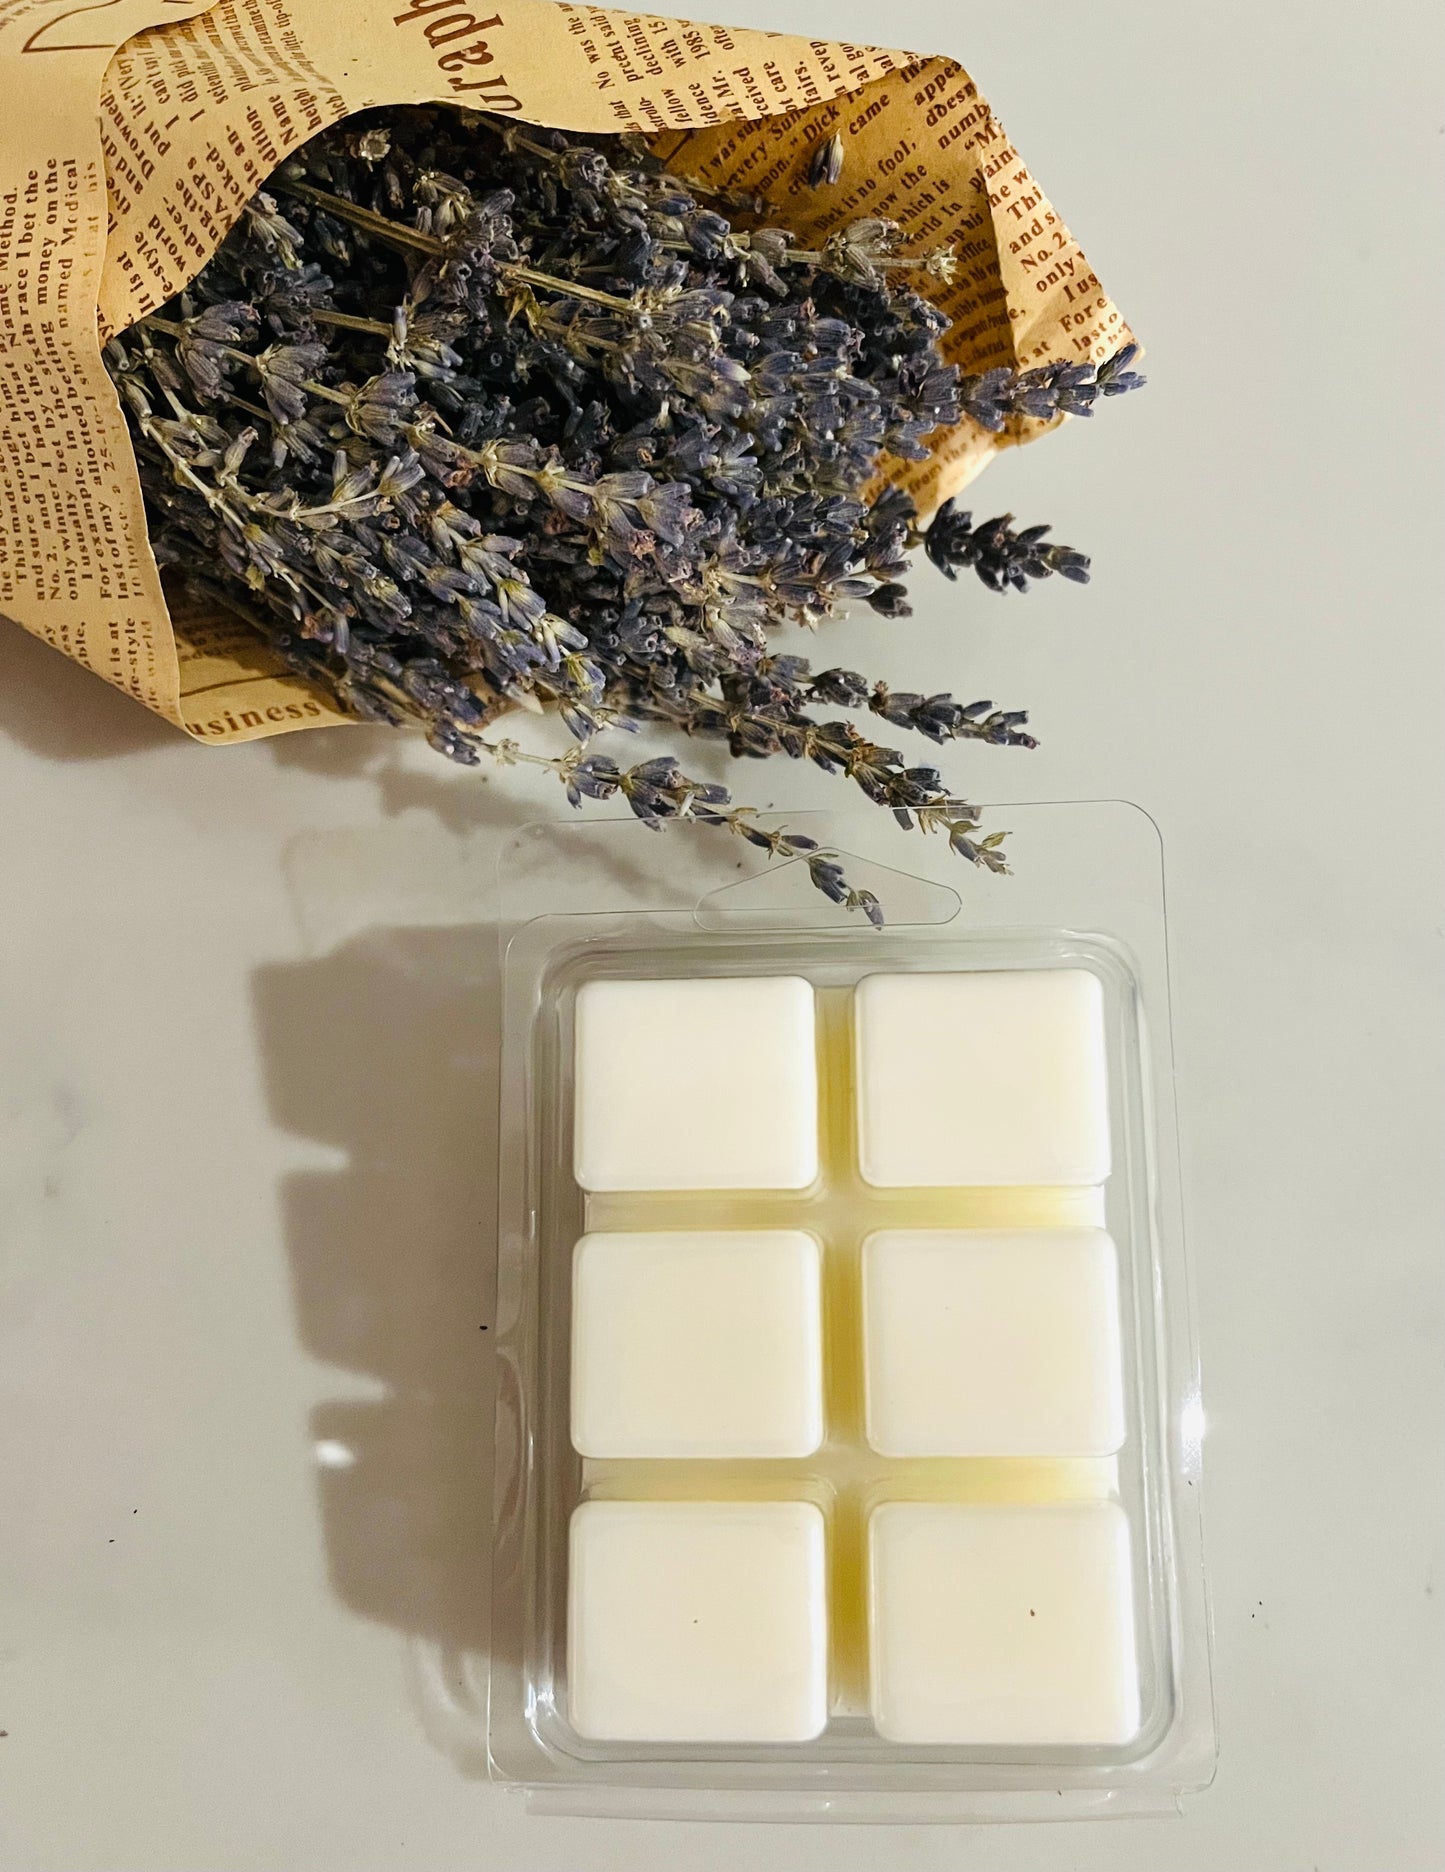 Lavender Aroma Hand Poured Wax Melts